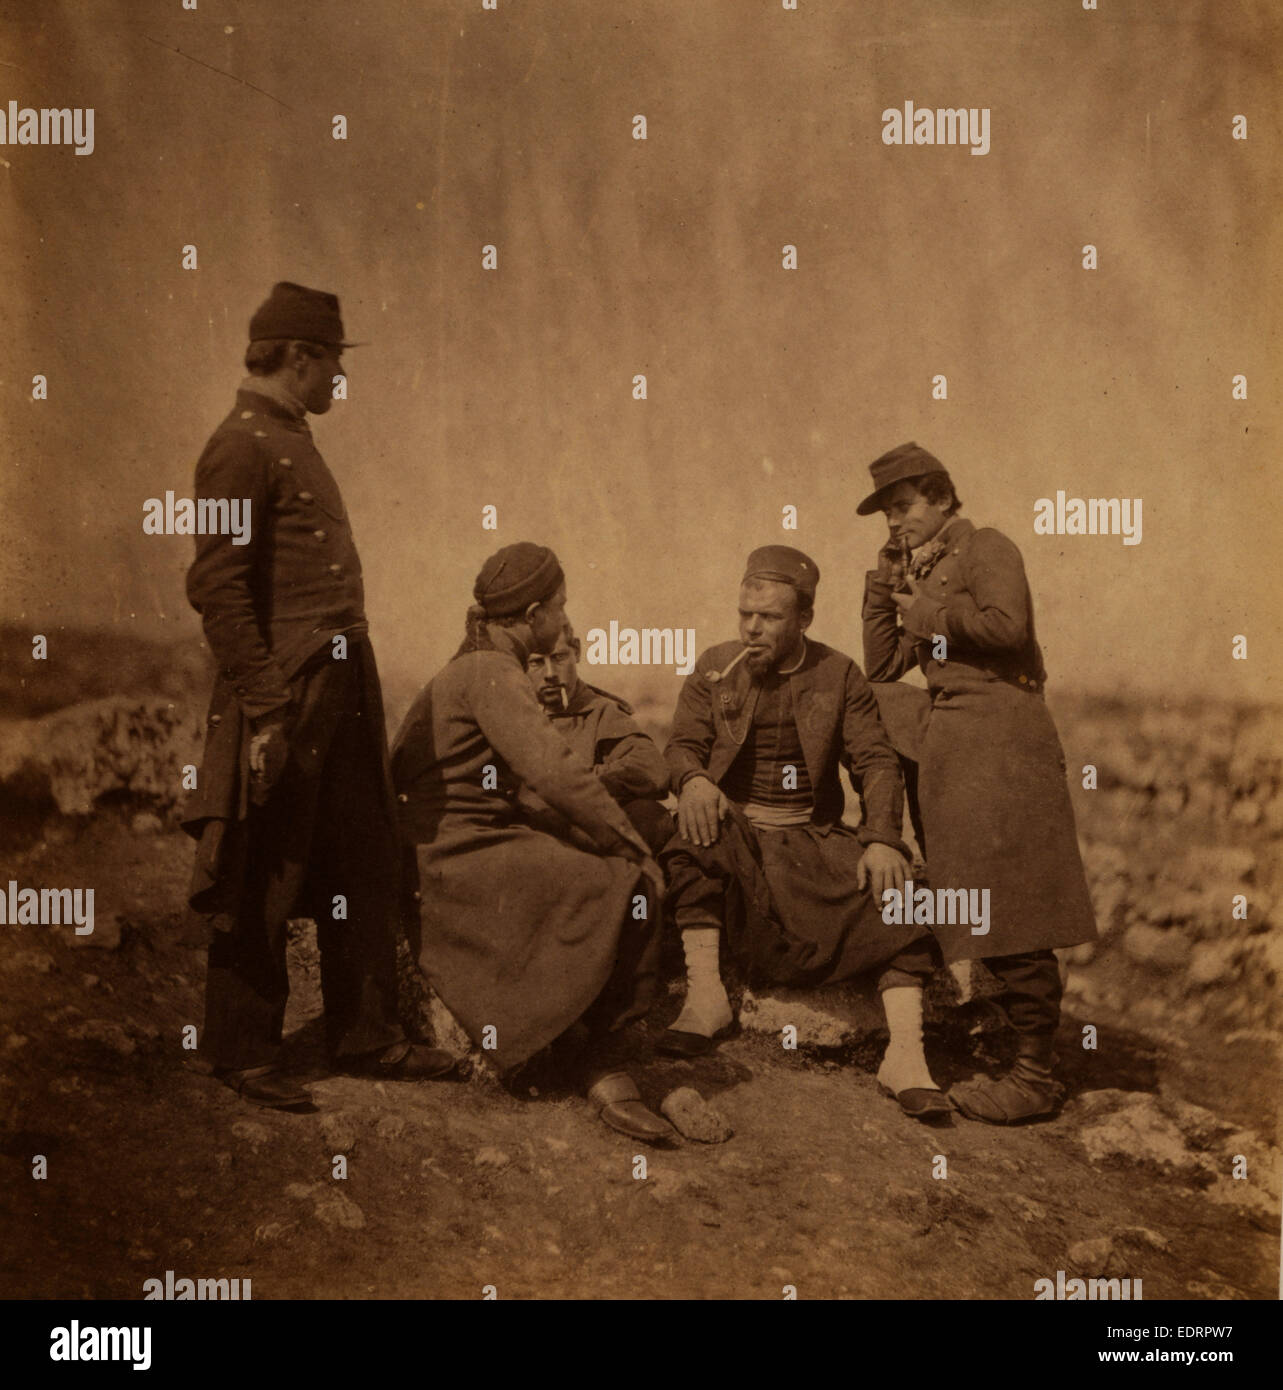 Zouaves & soldiers of the line, Crimean War, 1853-1856, Roger Fenton historic war campaign photo Stock Photo